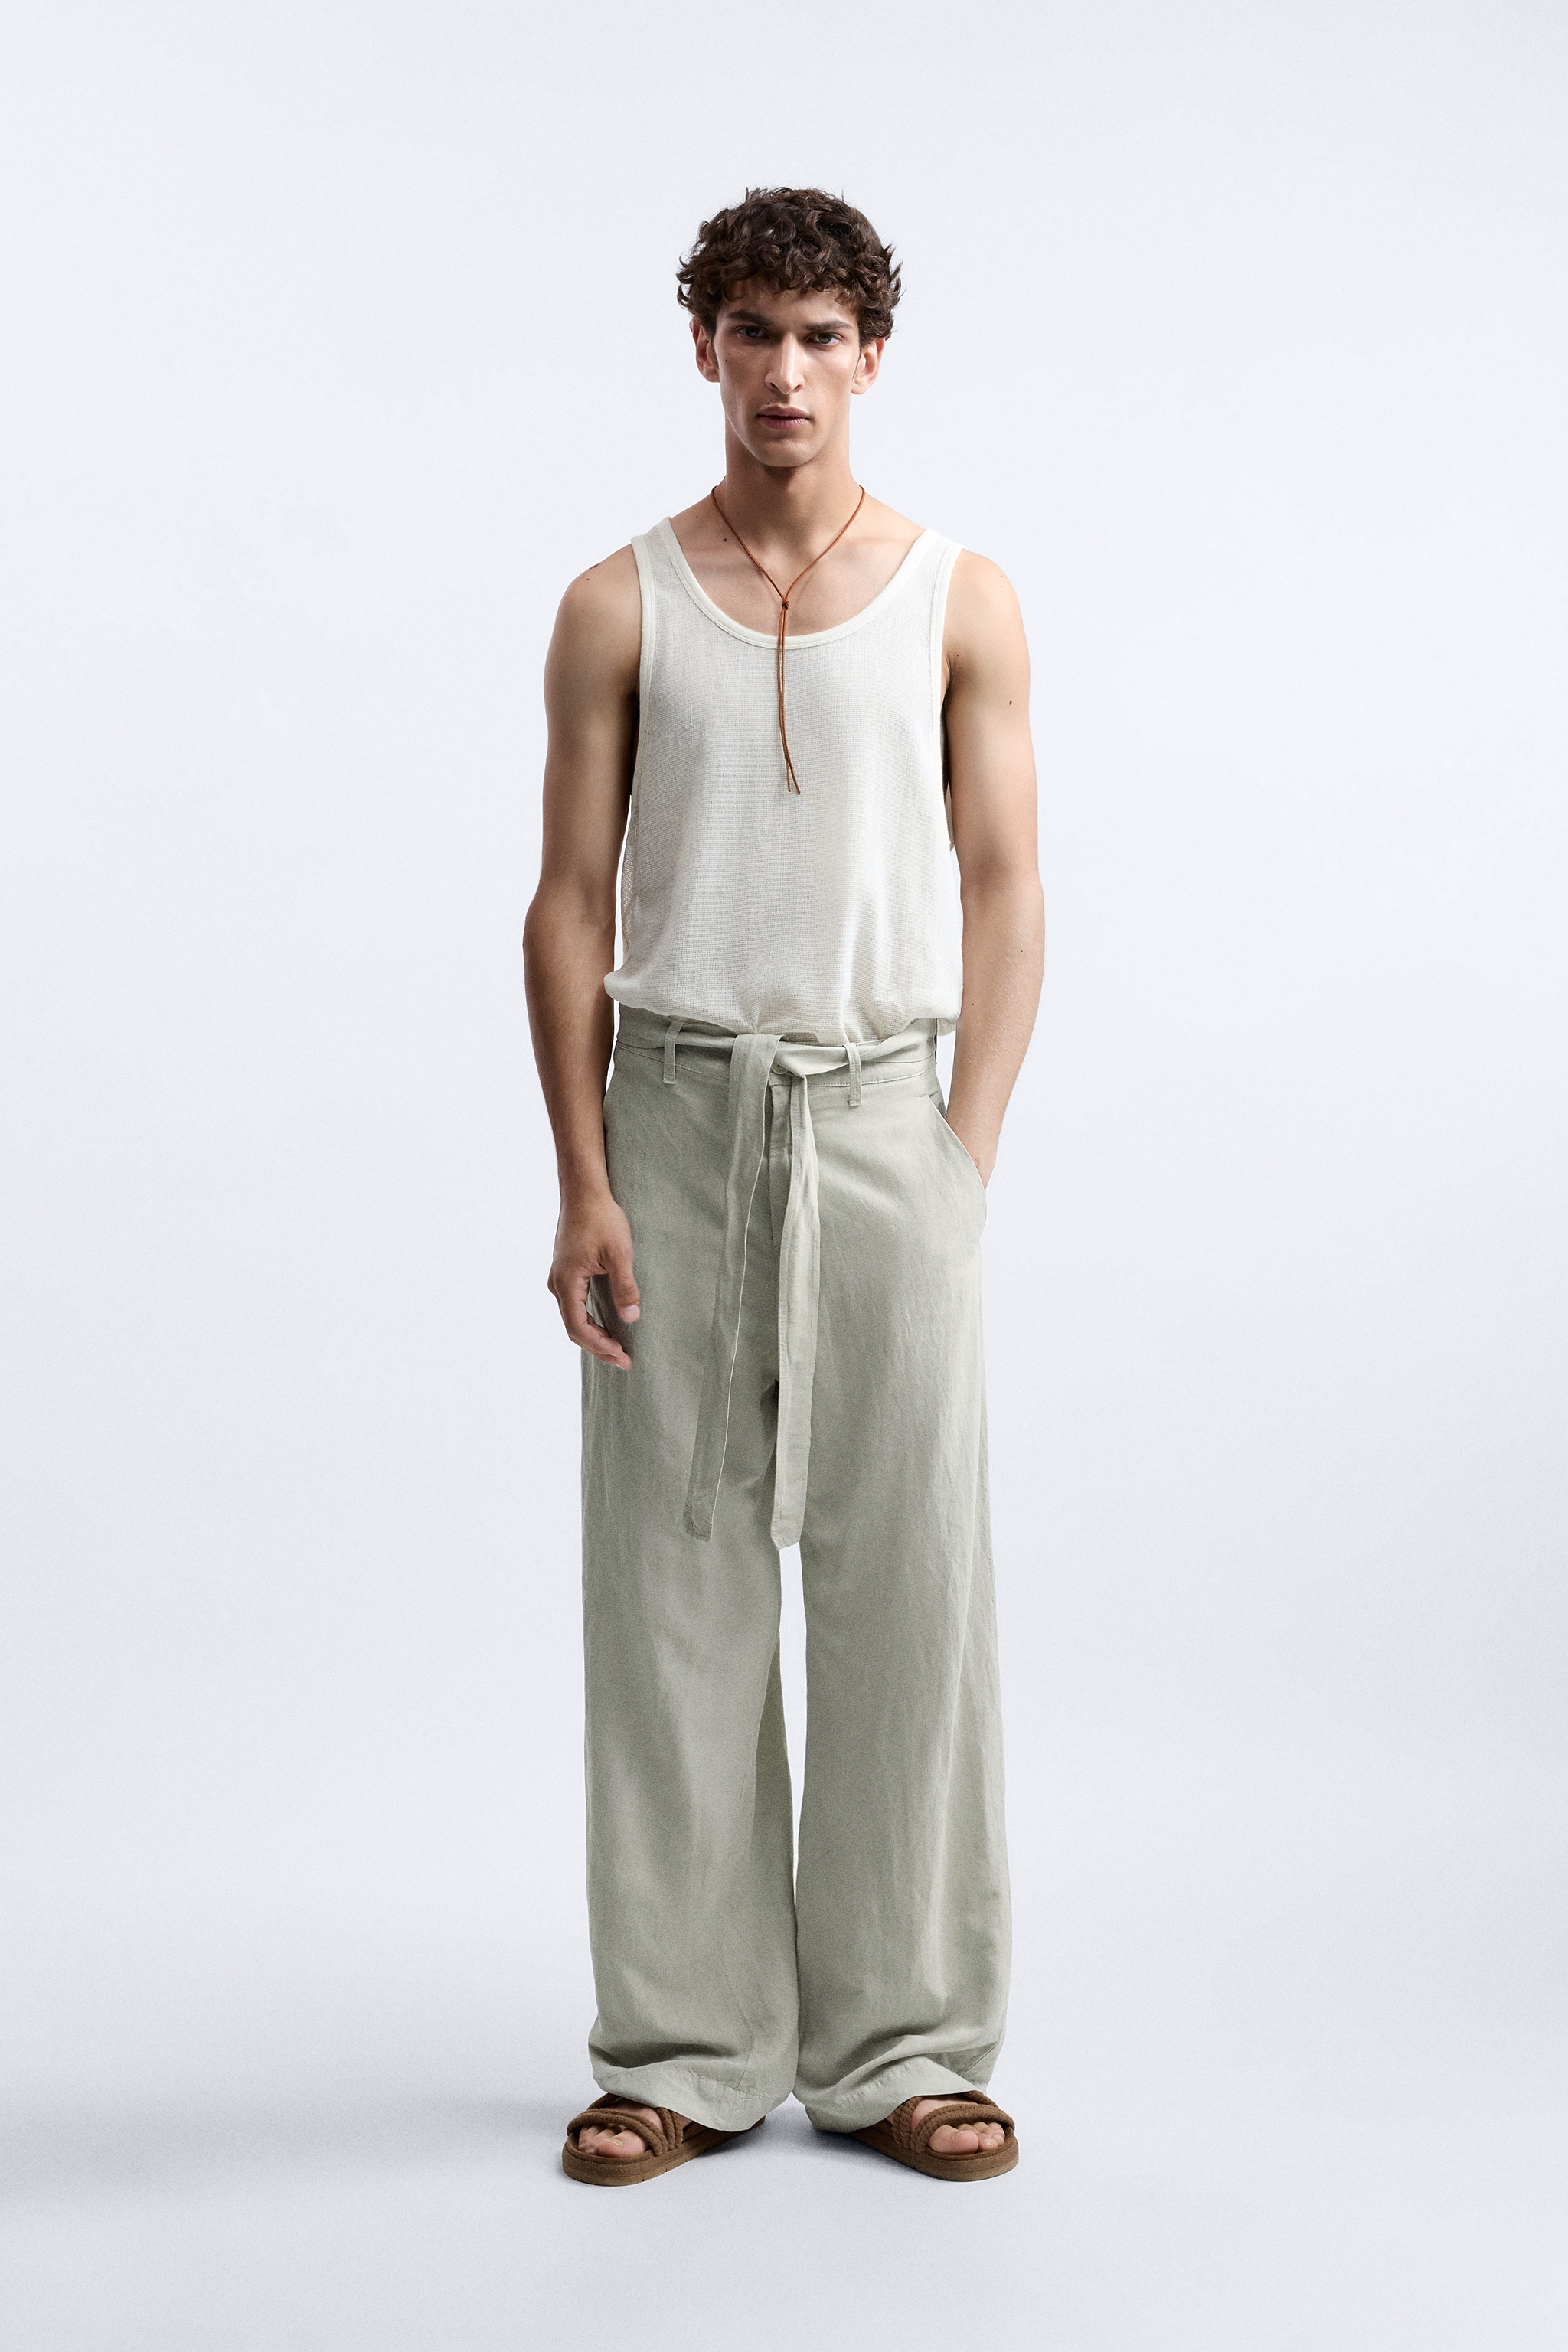 Zara LIMITED EDITION BELTED PANTS